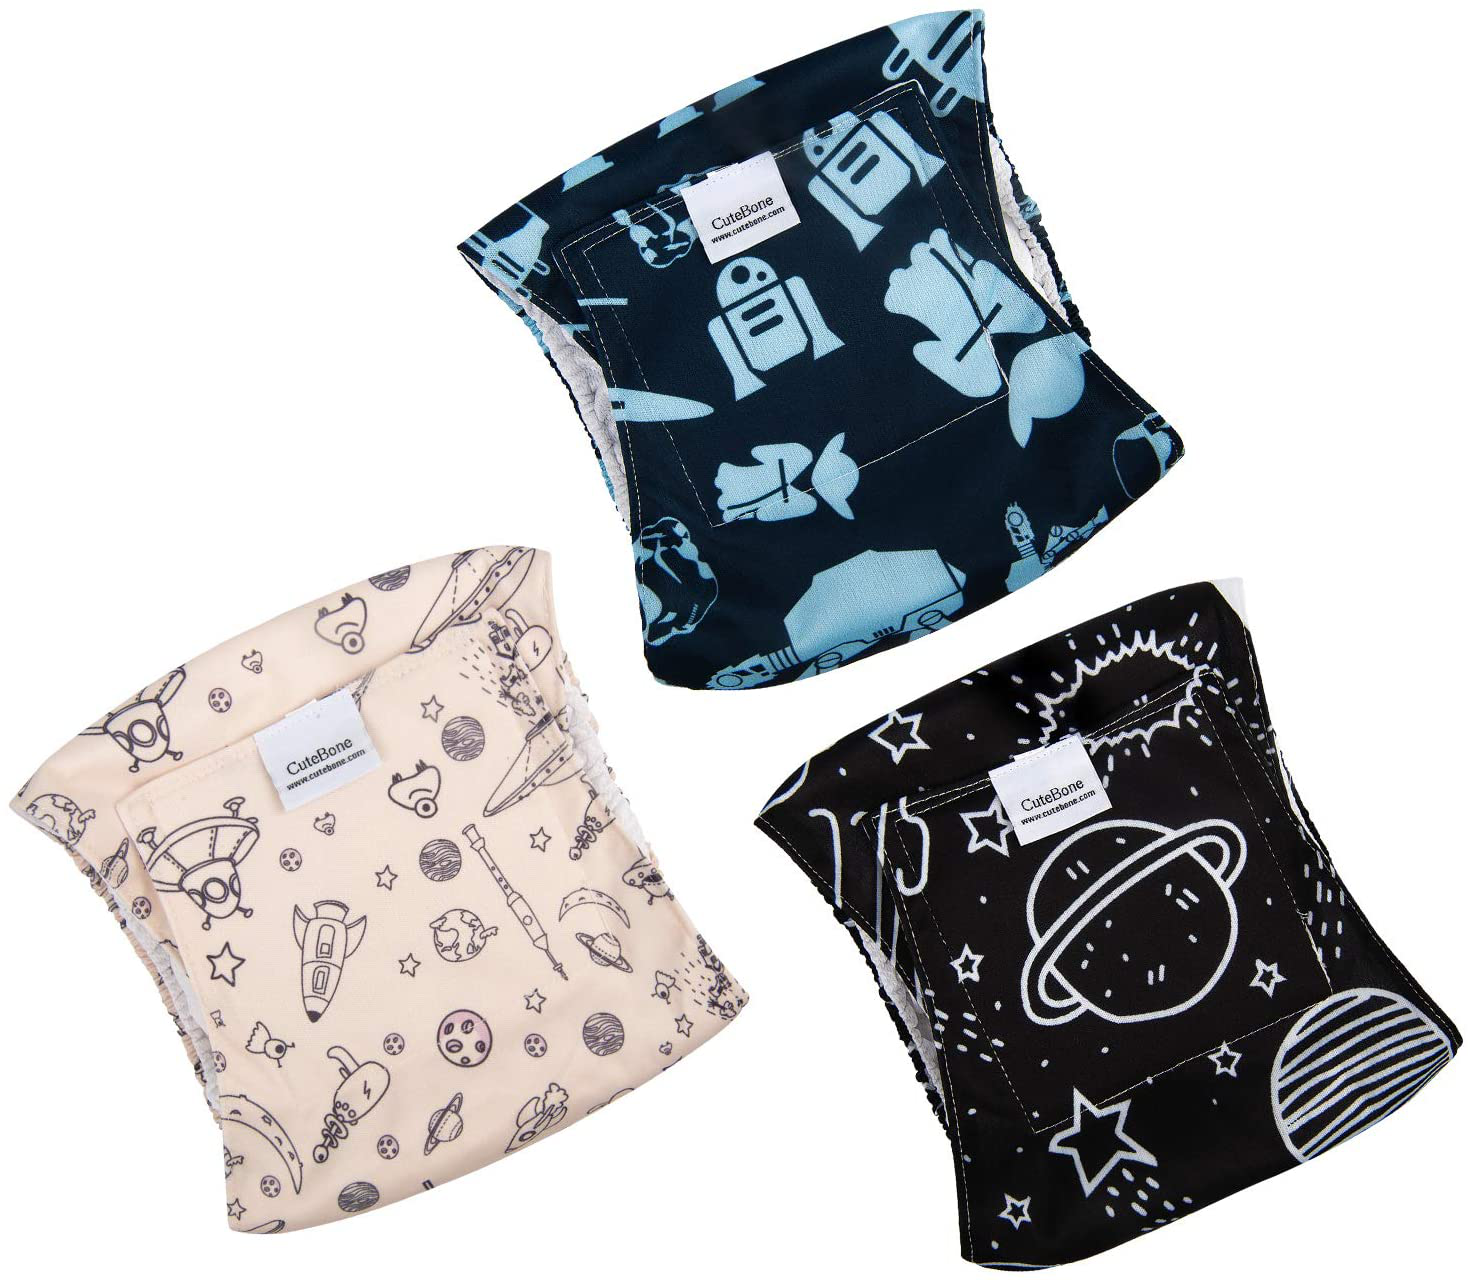 Cutebone Dog Diapers Male Washable Belly Band for Male Dogs Wraps 3Pcs a Pack